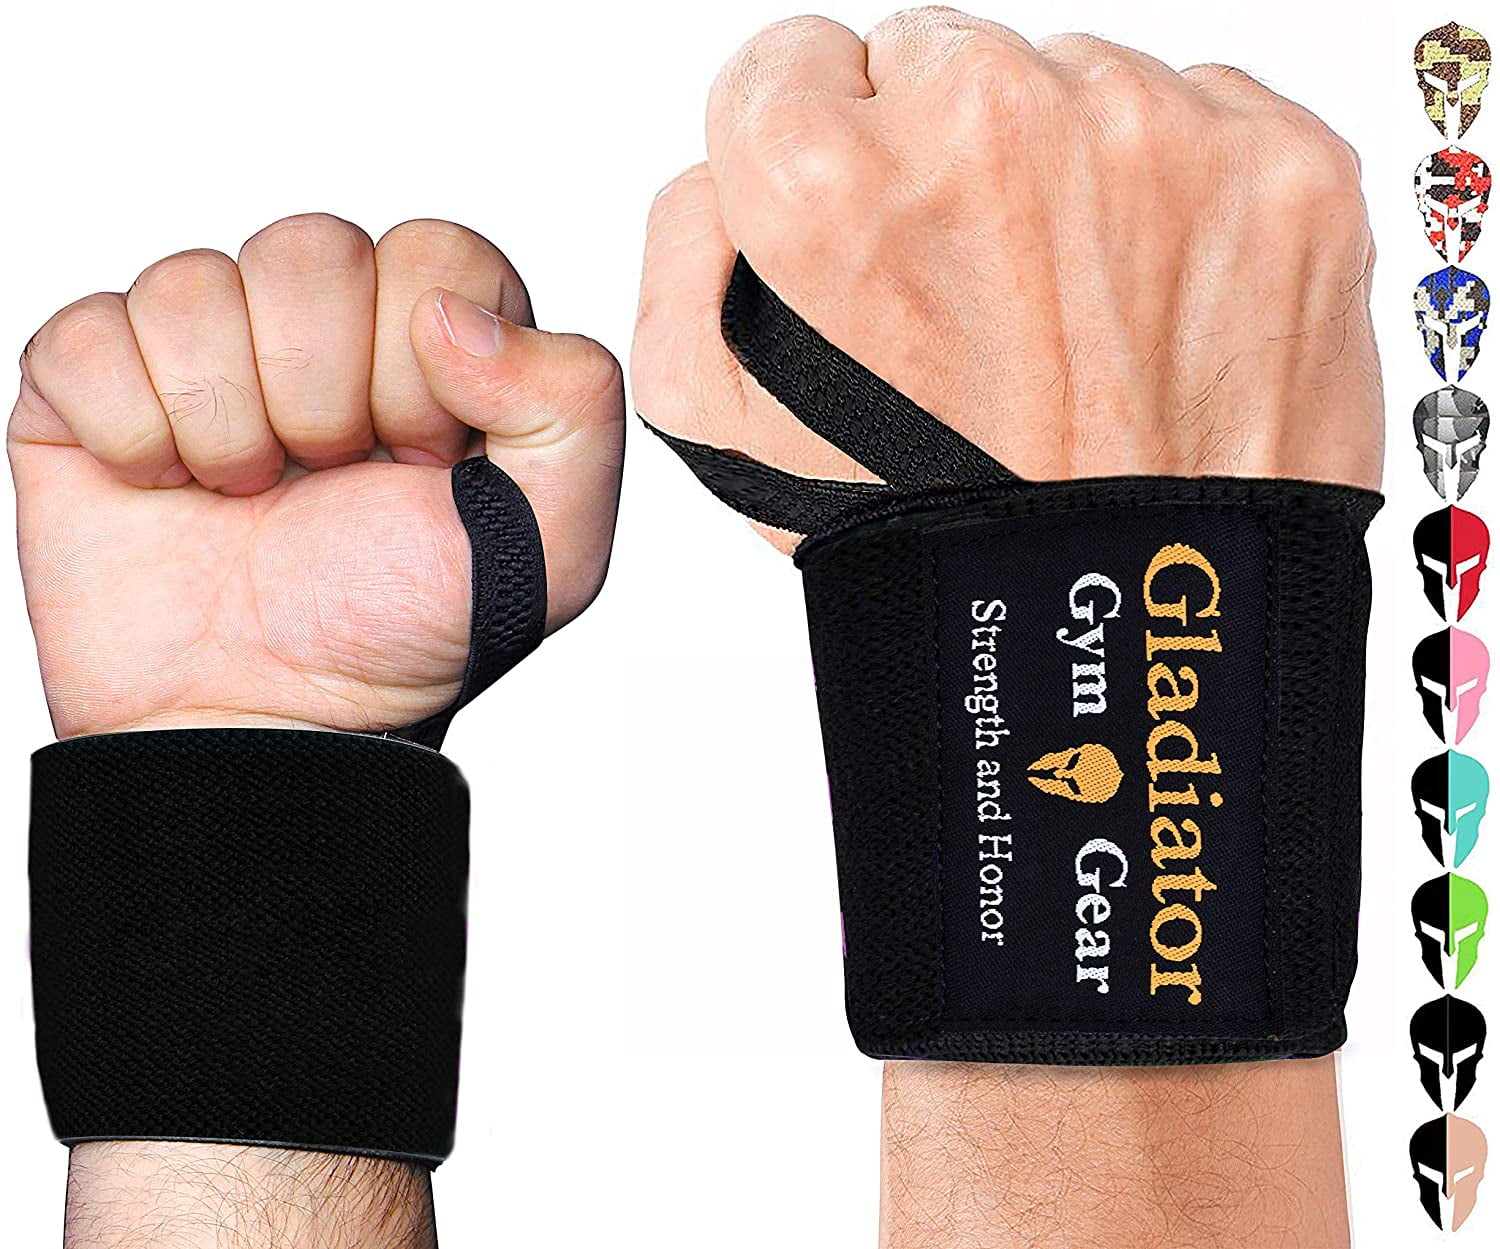 Gym Power Training Weight Lifting Straps Wraps Hand Wrist Support Protection-DG 